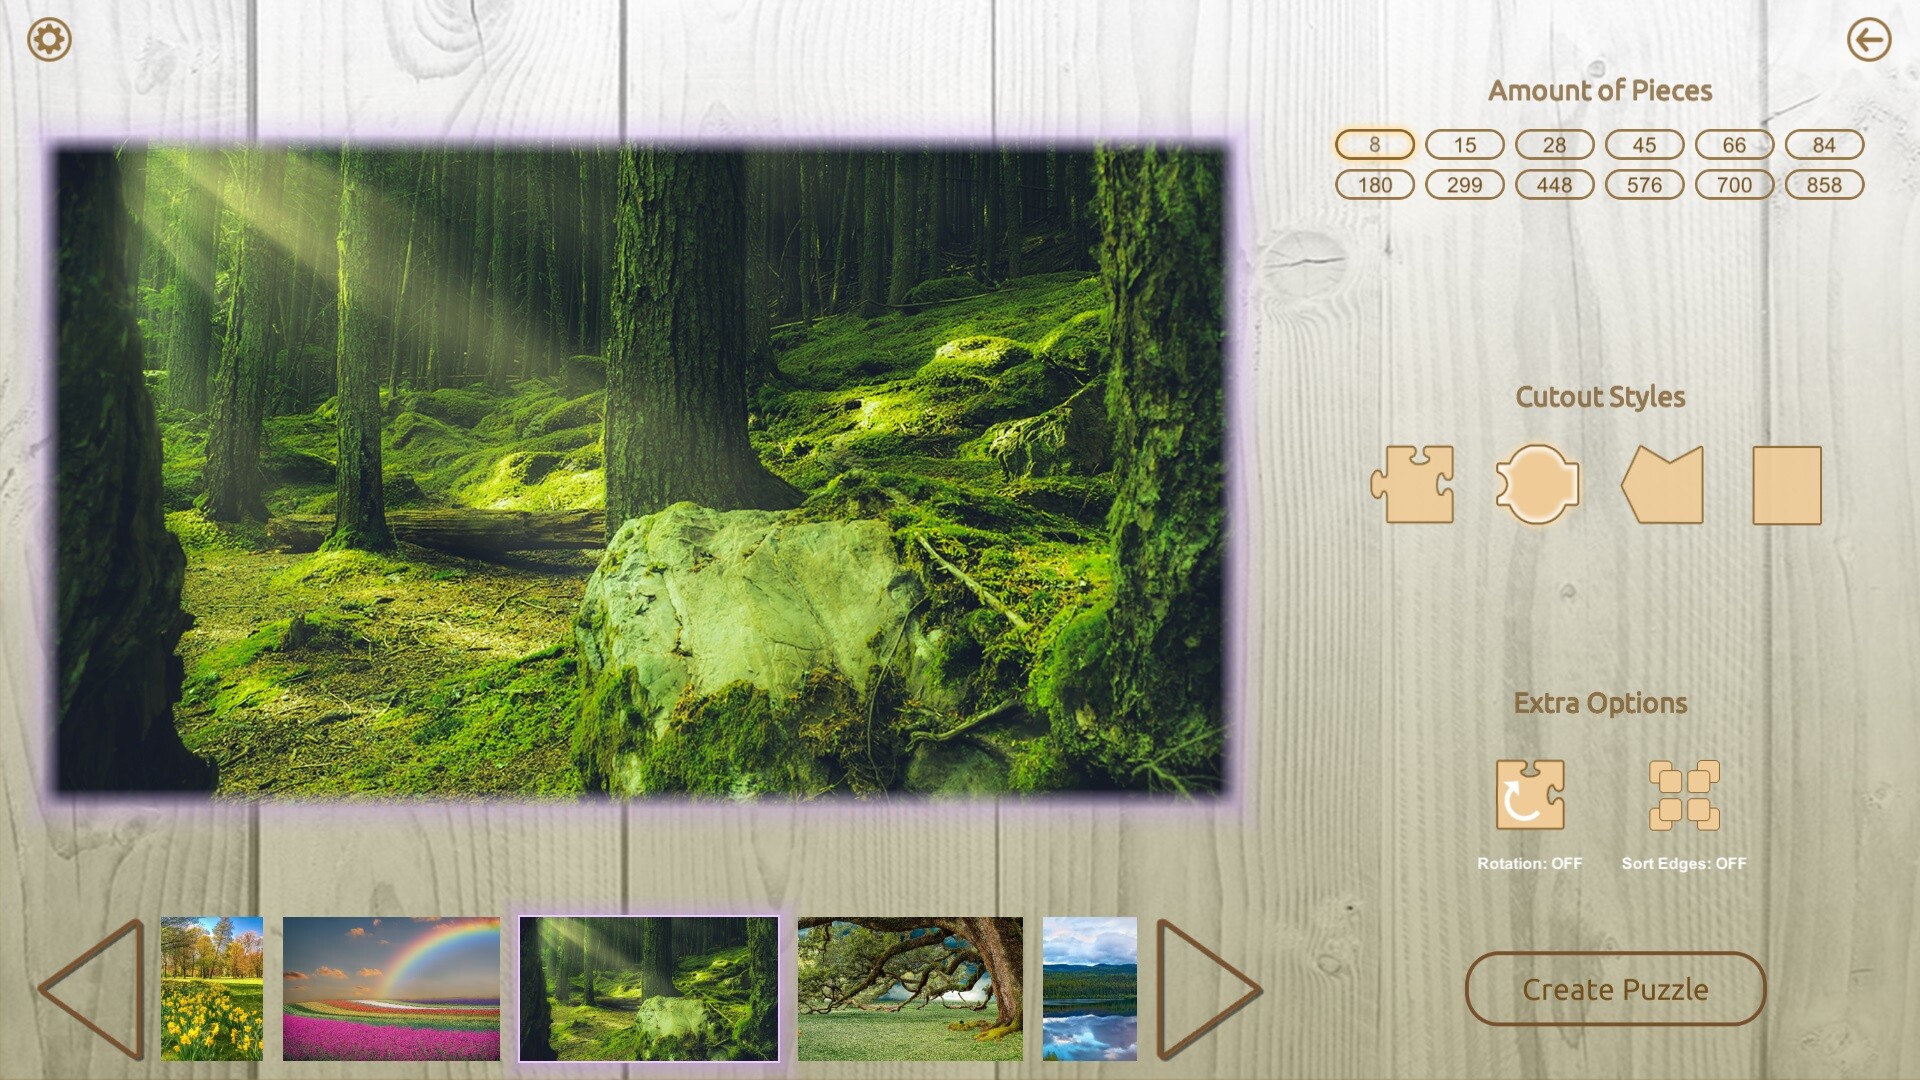 House of Jigsaw: Fascinating Landscapes Featured Screenshot #1